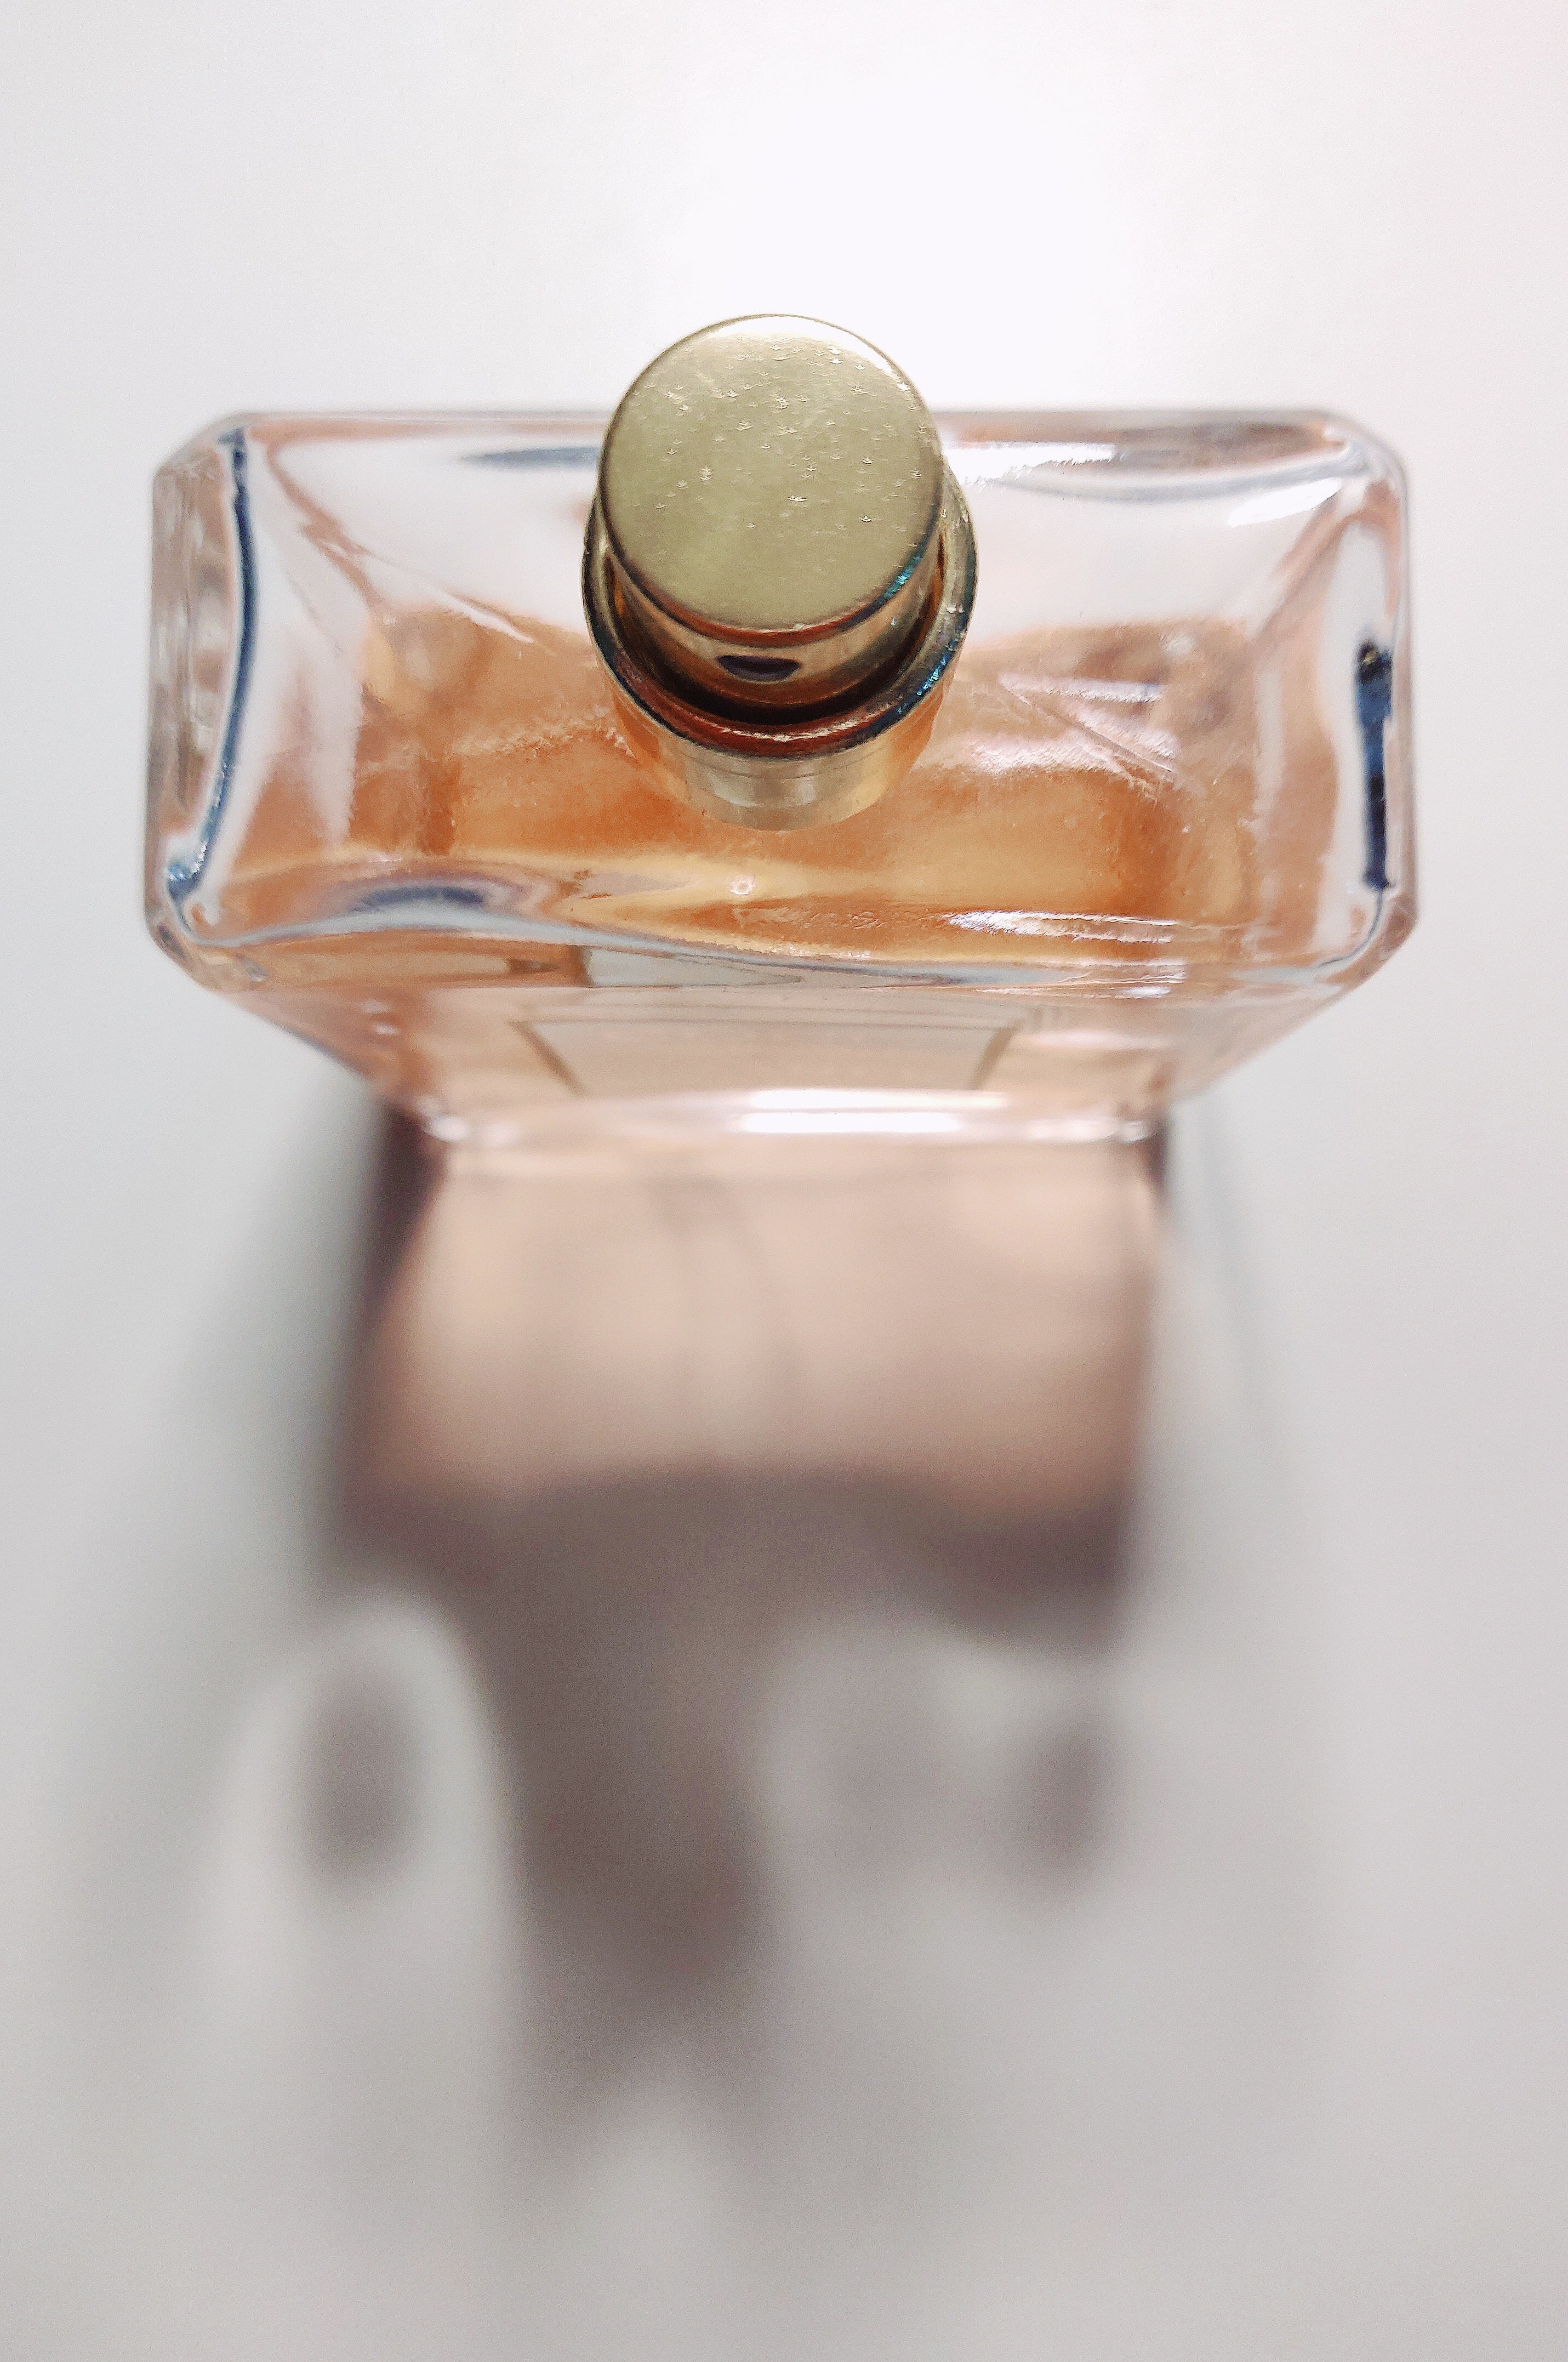 Louis Vuitton Spell On You Perfume Alternative for Women - Composition